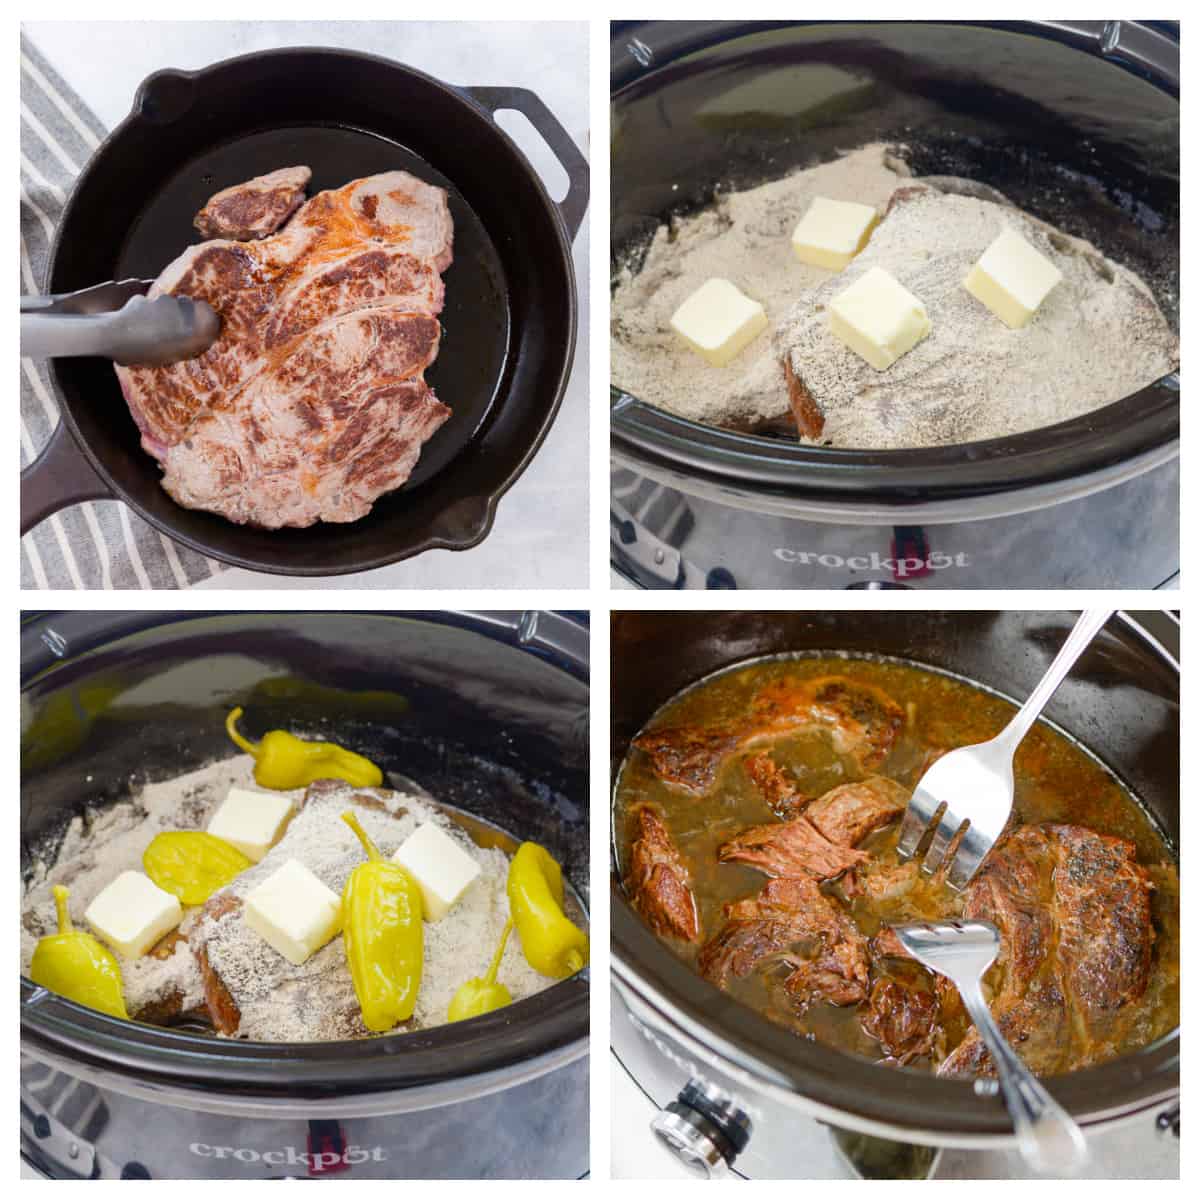 Collage showing how to make Mississippi pot roast in the crockpot.